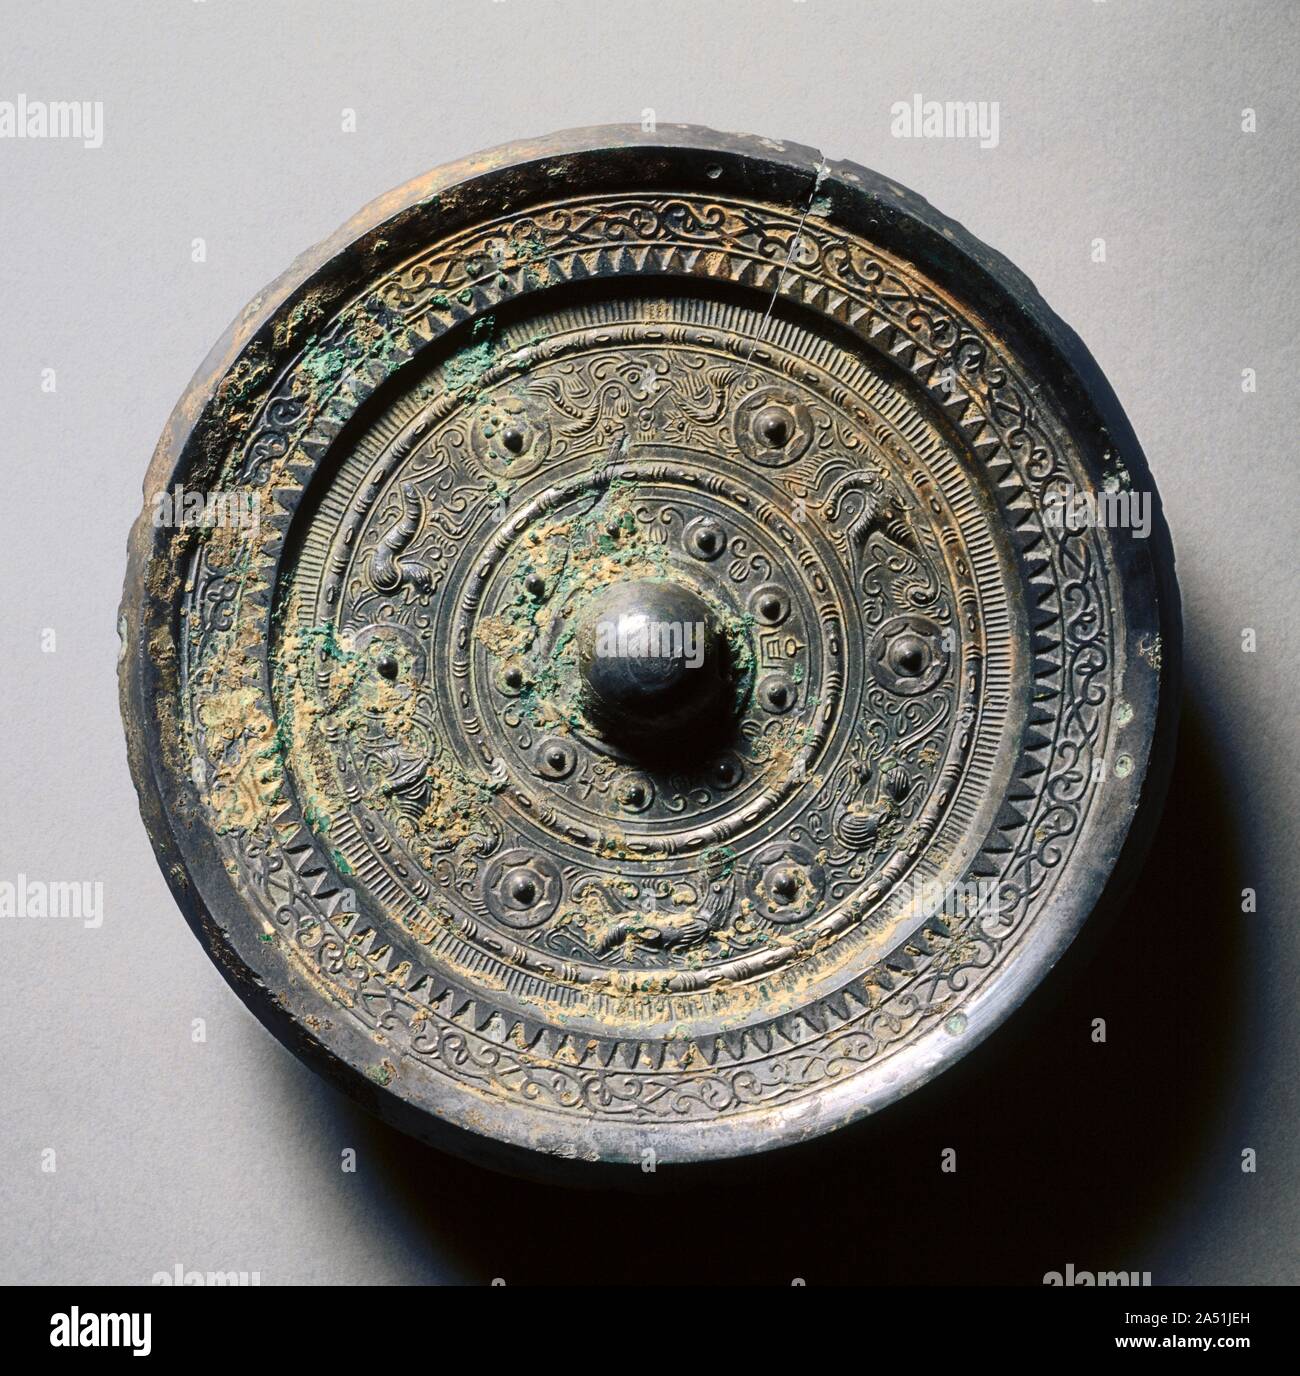 Mirror with Concentric Circles, an Immortal, and Auspicious Animals, 1st century. Mirror with Concentric Circles, an Immortal, and Auspicious Animals, 1st century ad China, Eastern Han dynasty (ad 25-220) CMA 1995.304 [Cat. no. 23] Stock Photo